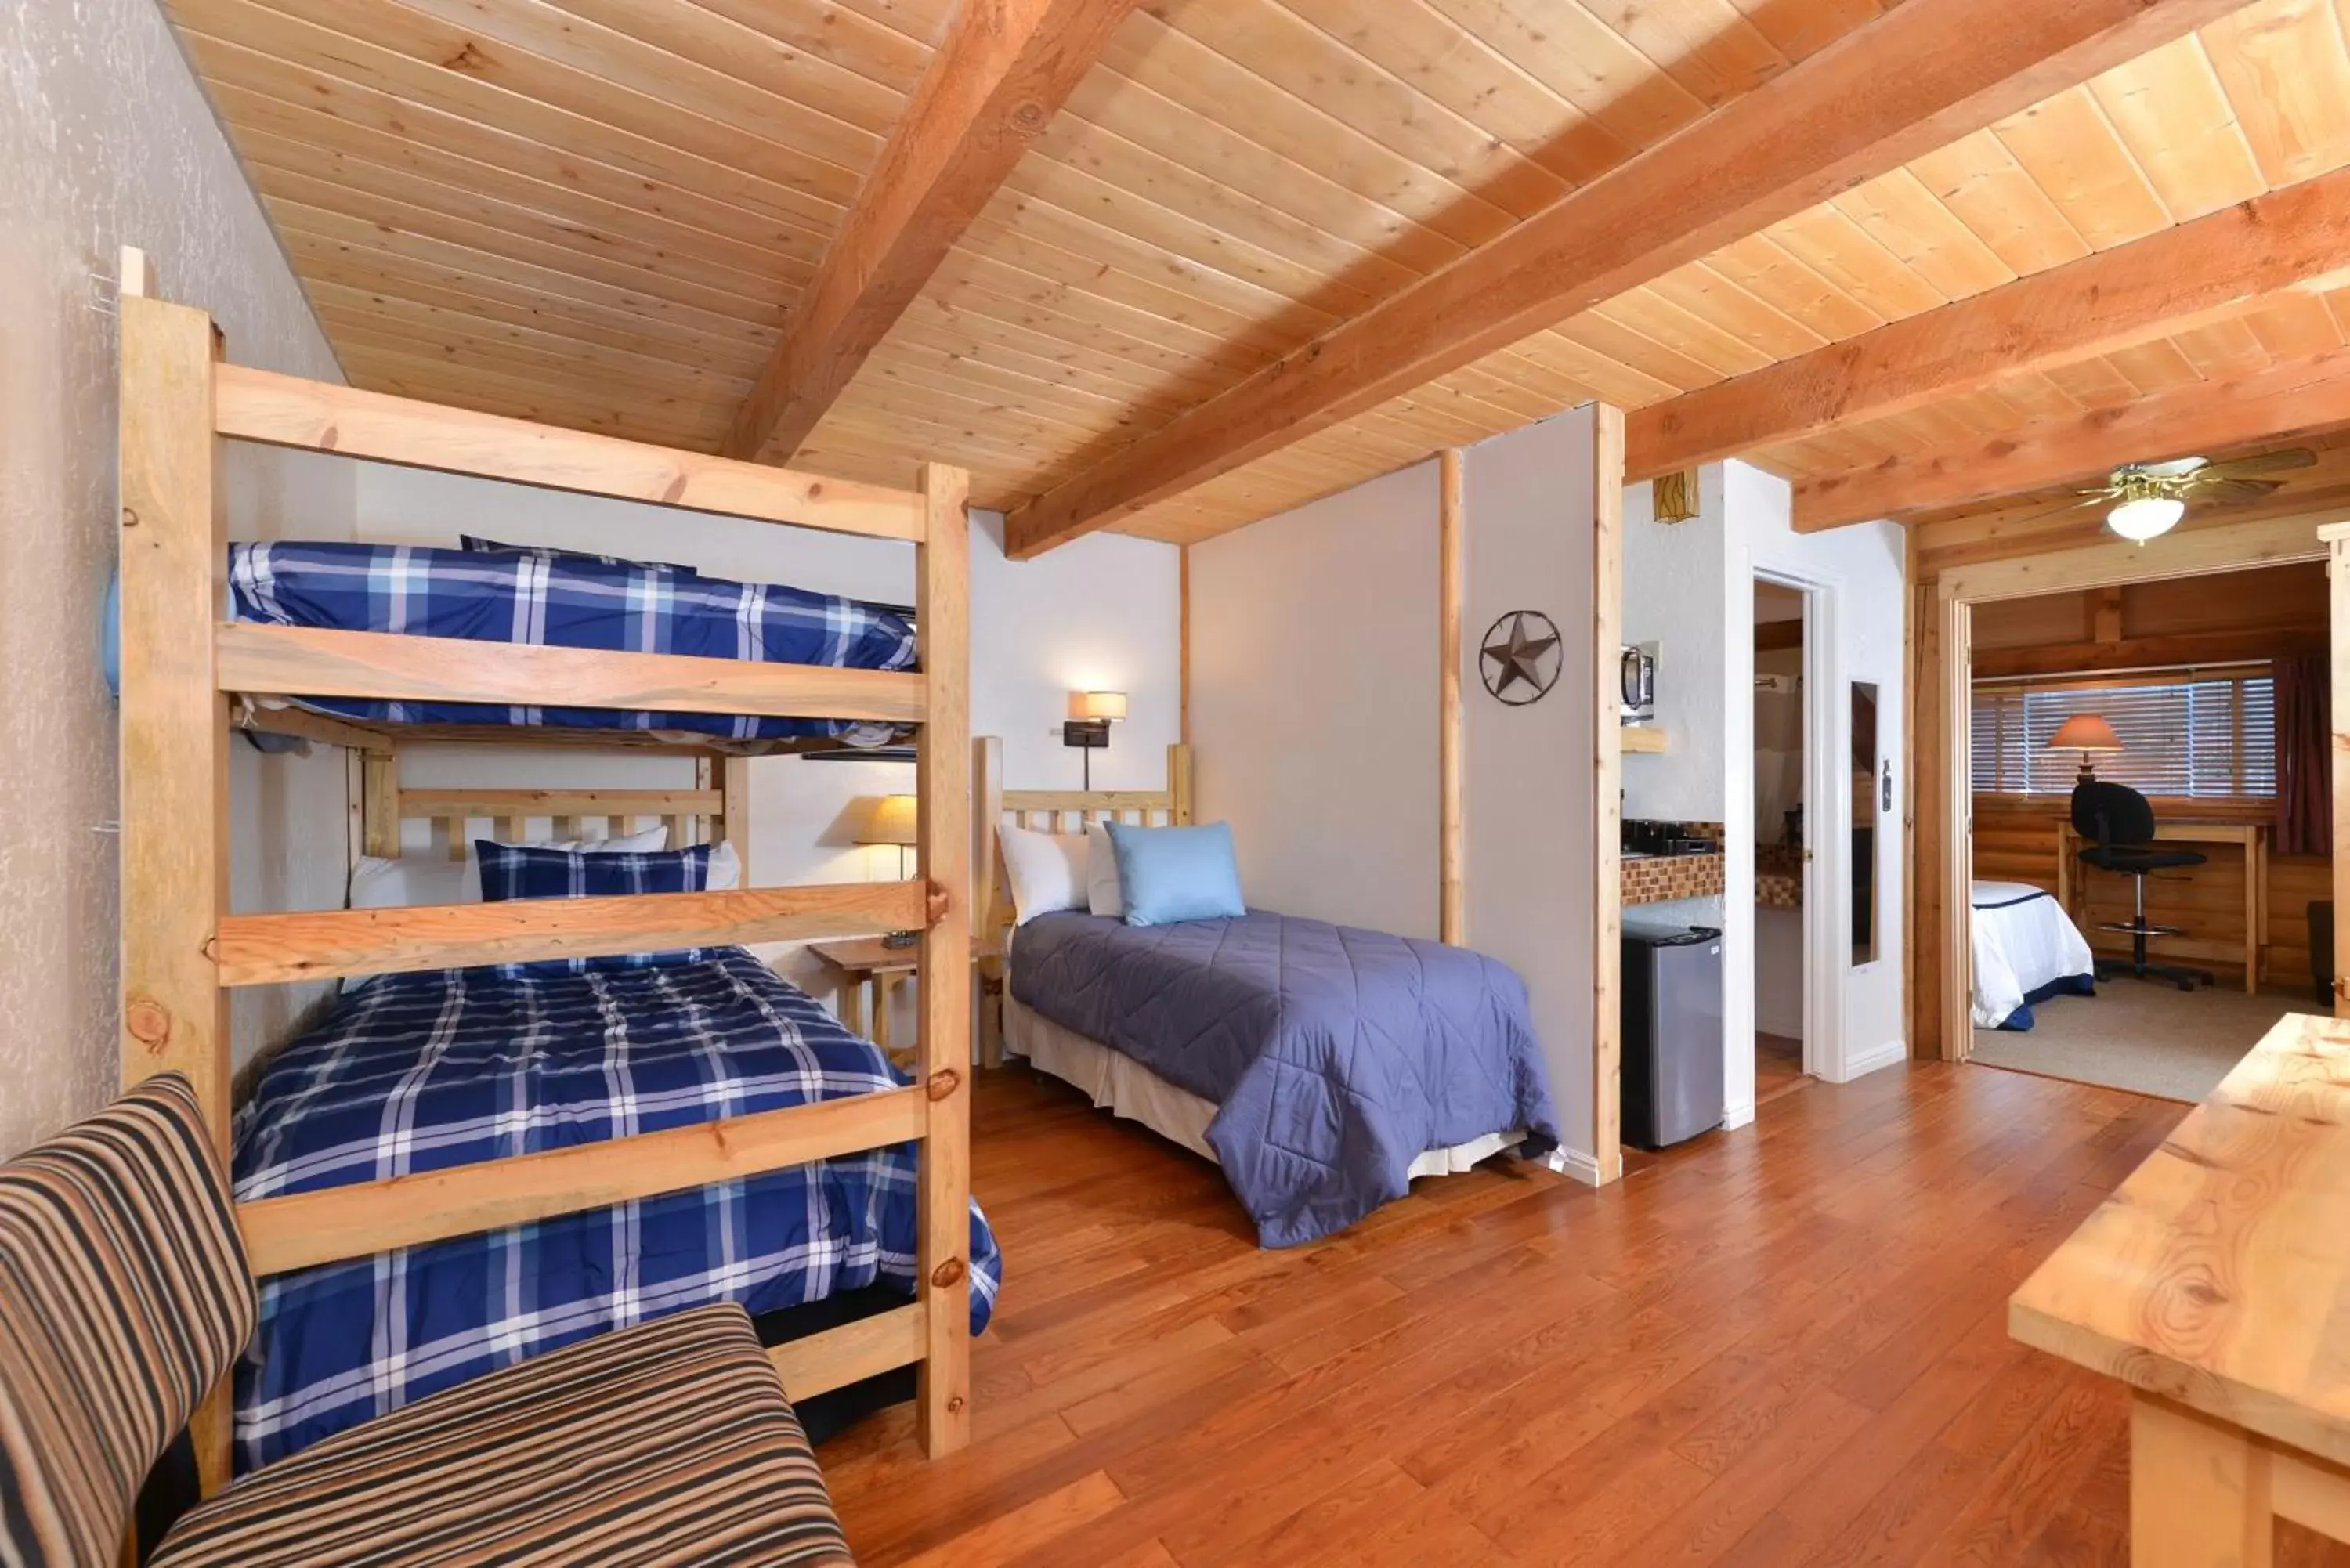 Bunk Bed in The Boulder Creek Lodge